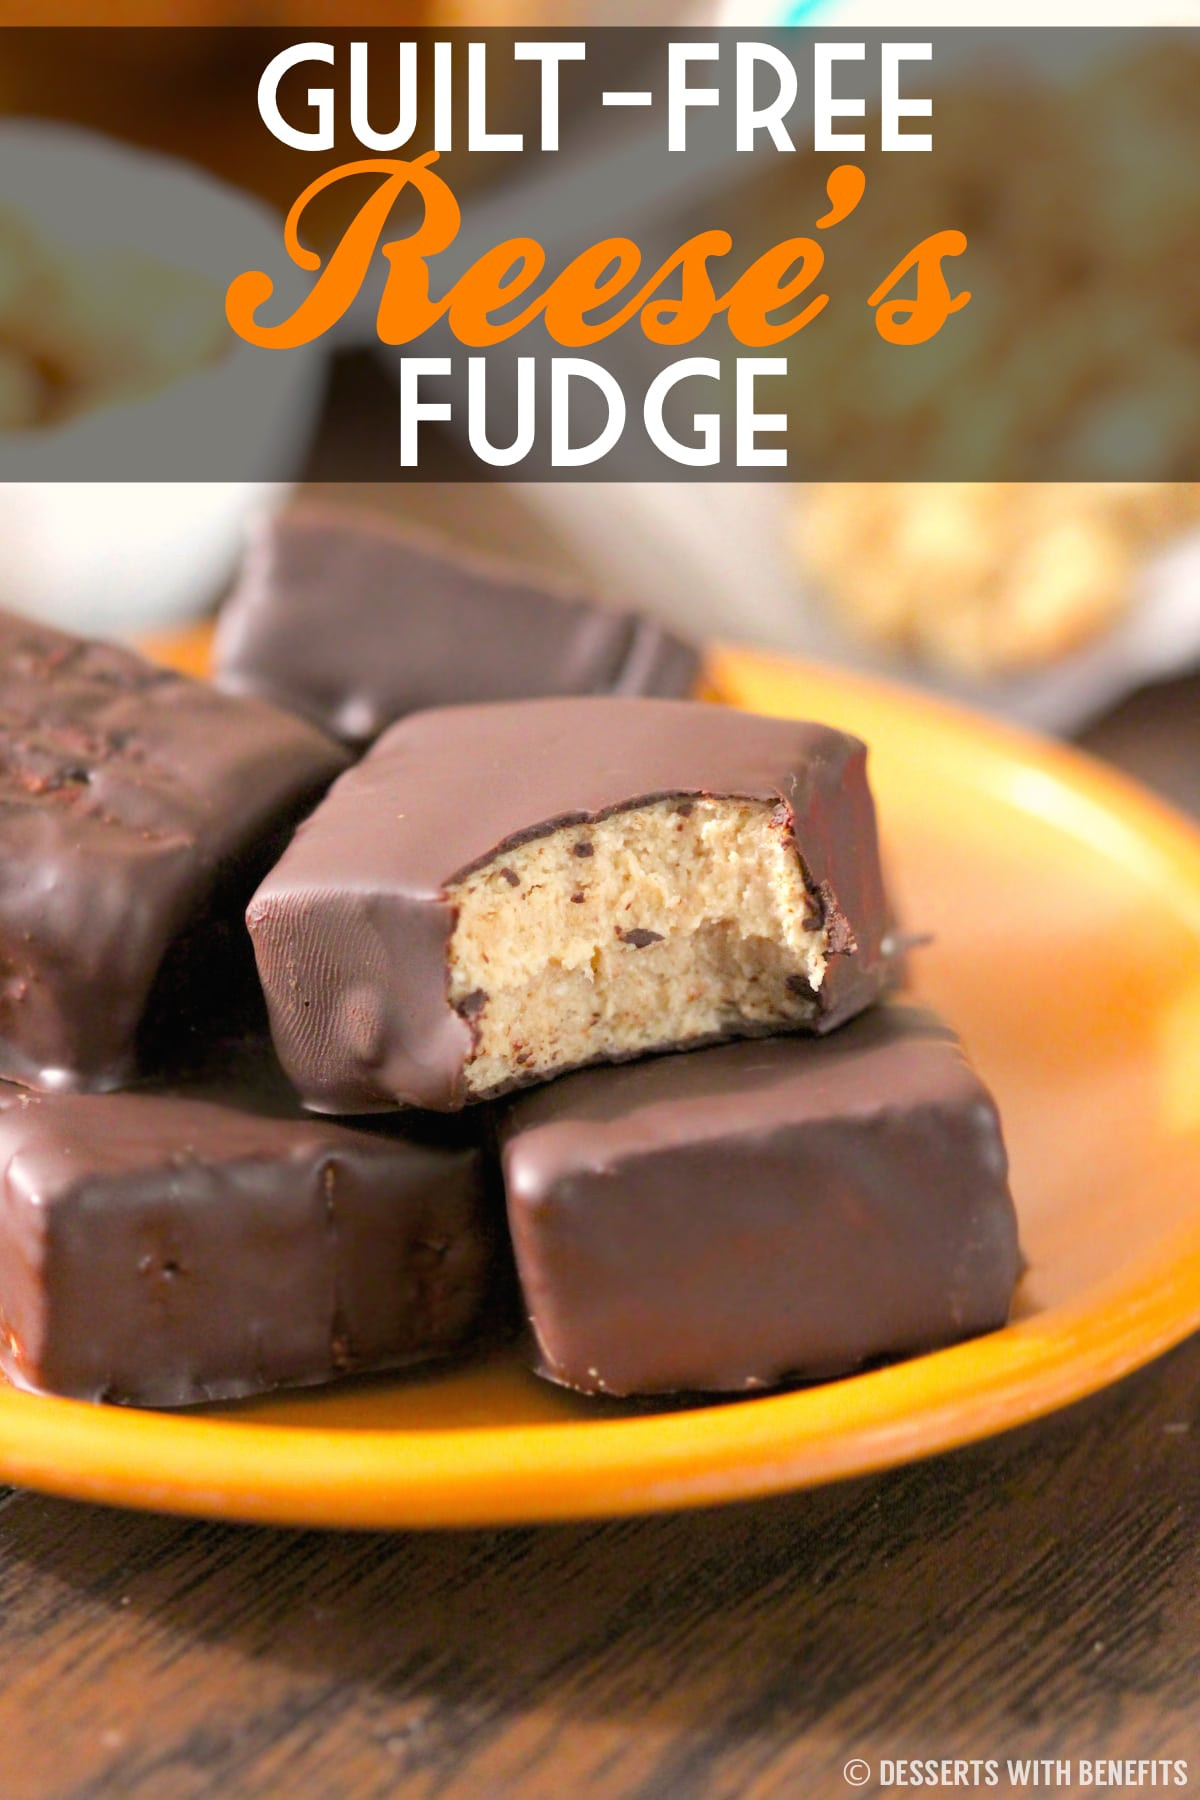 Low Calorie Low Sugar Desserts
 Healthy Reese s Fudge Desserts with Benefits